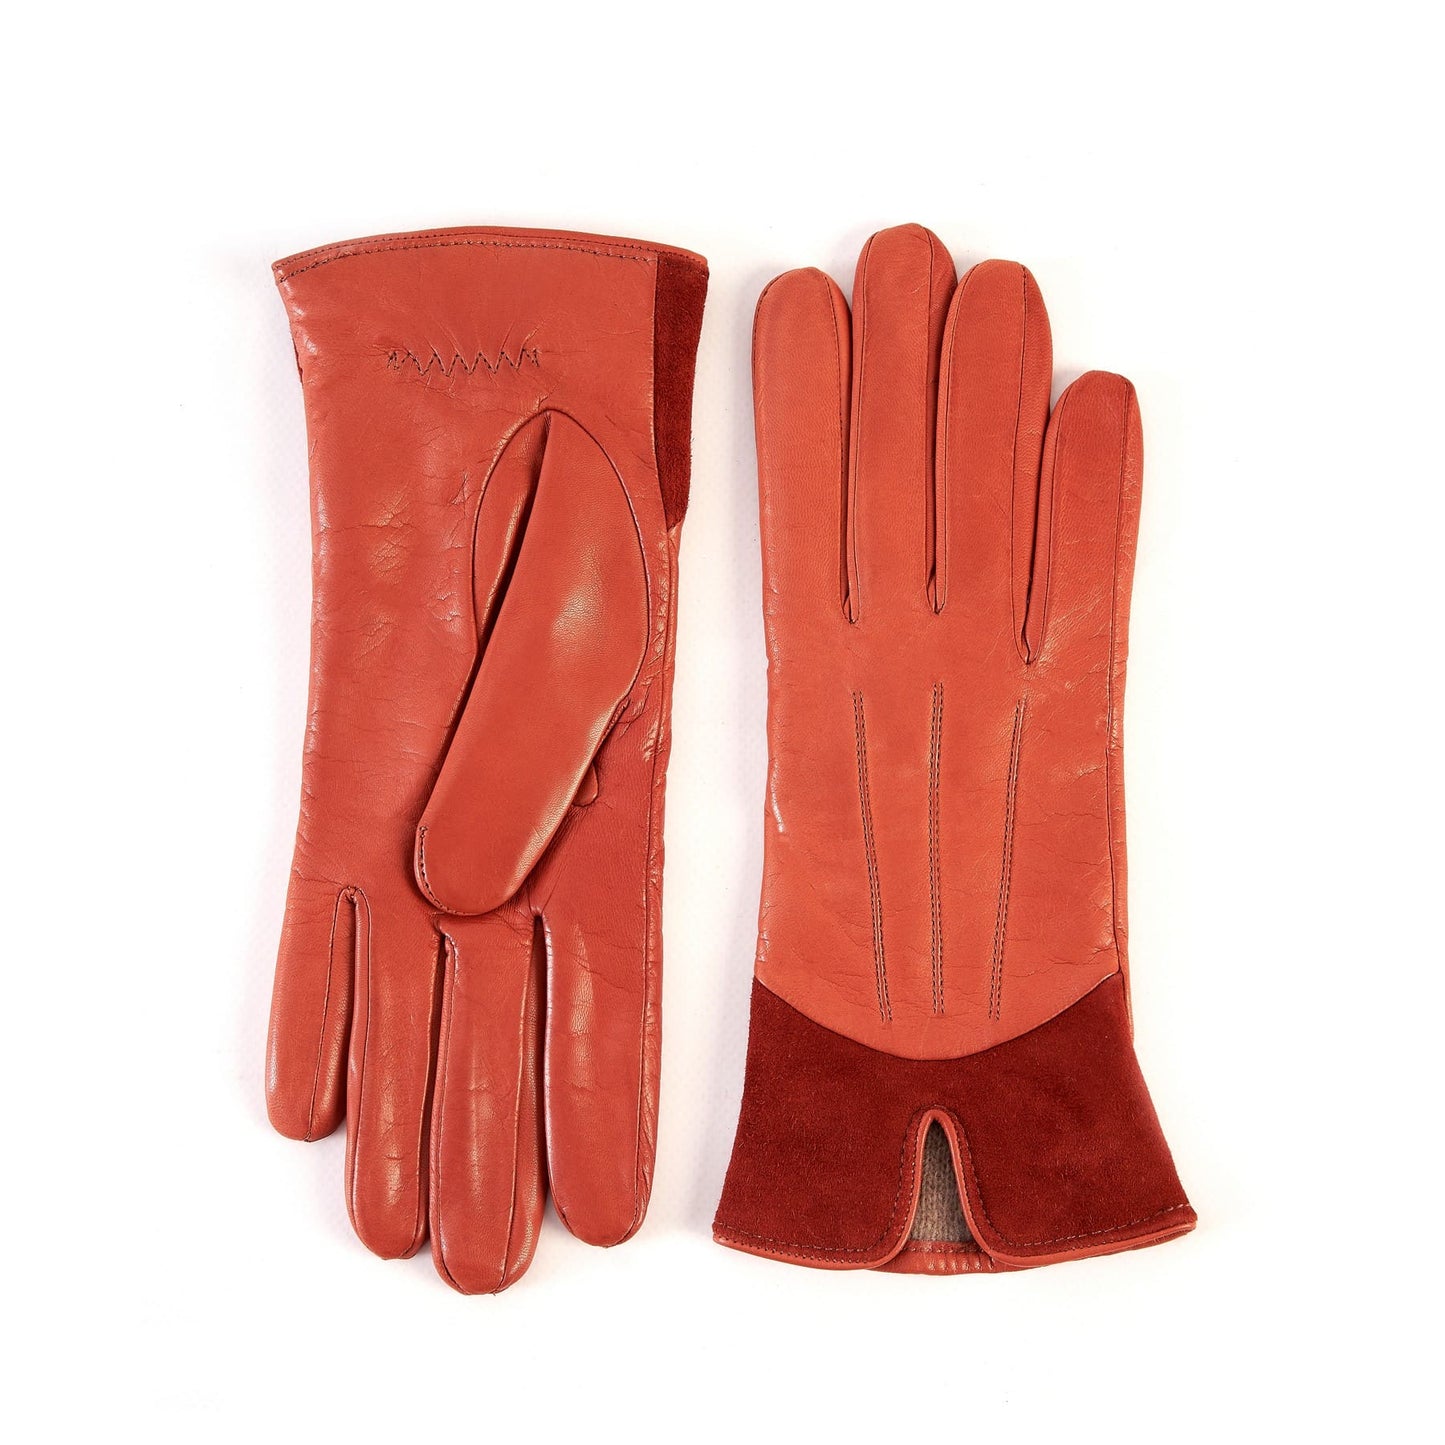 Women's orange nappa leather gloves with suede panel insert on top cashmere lined